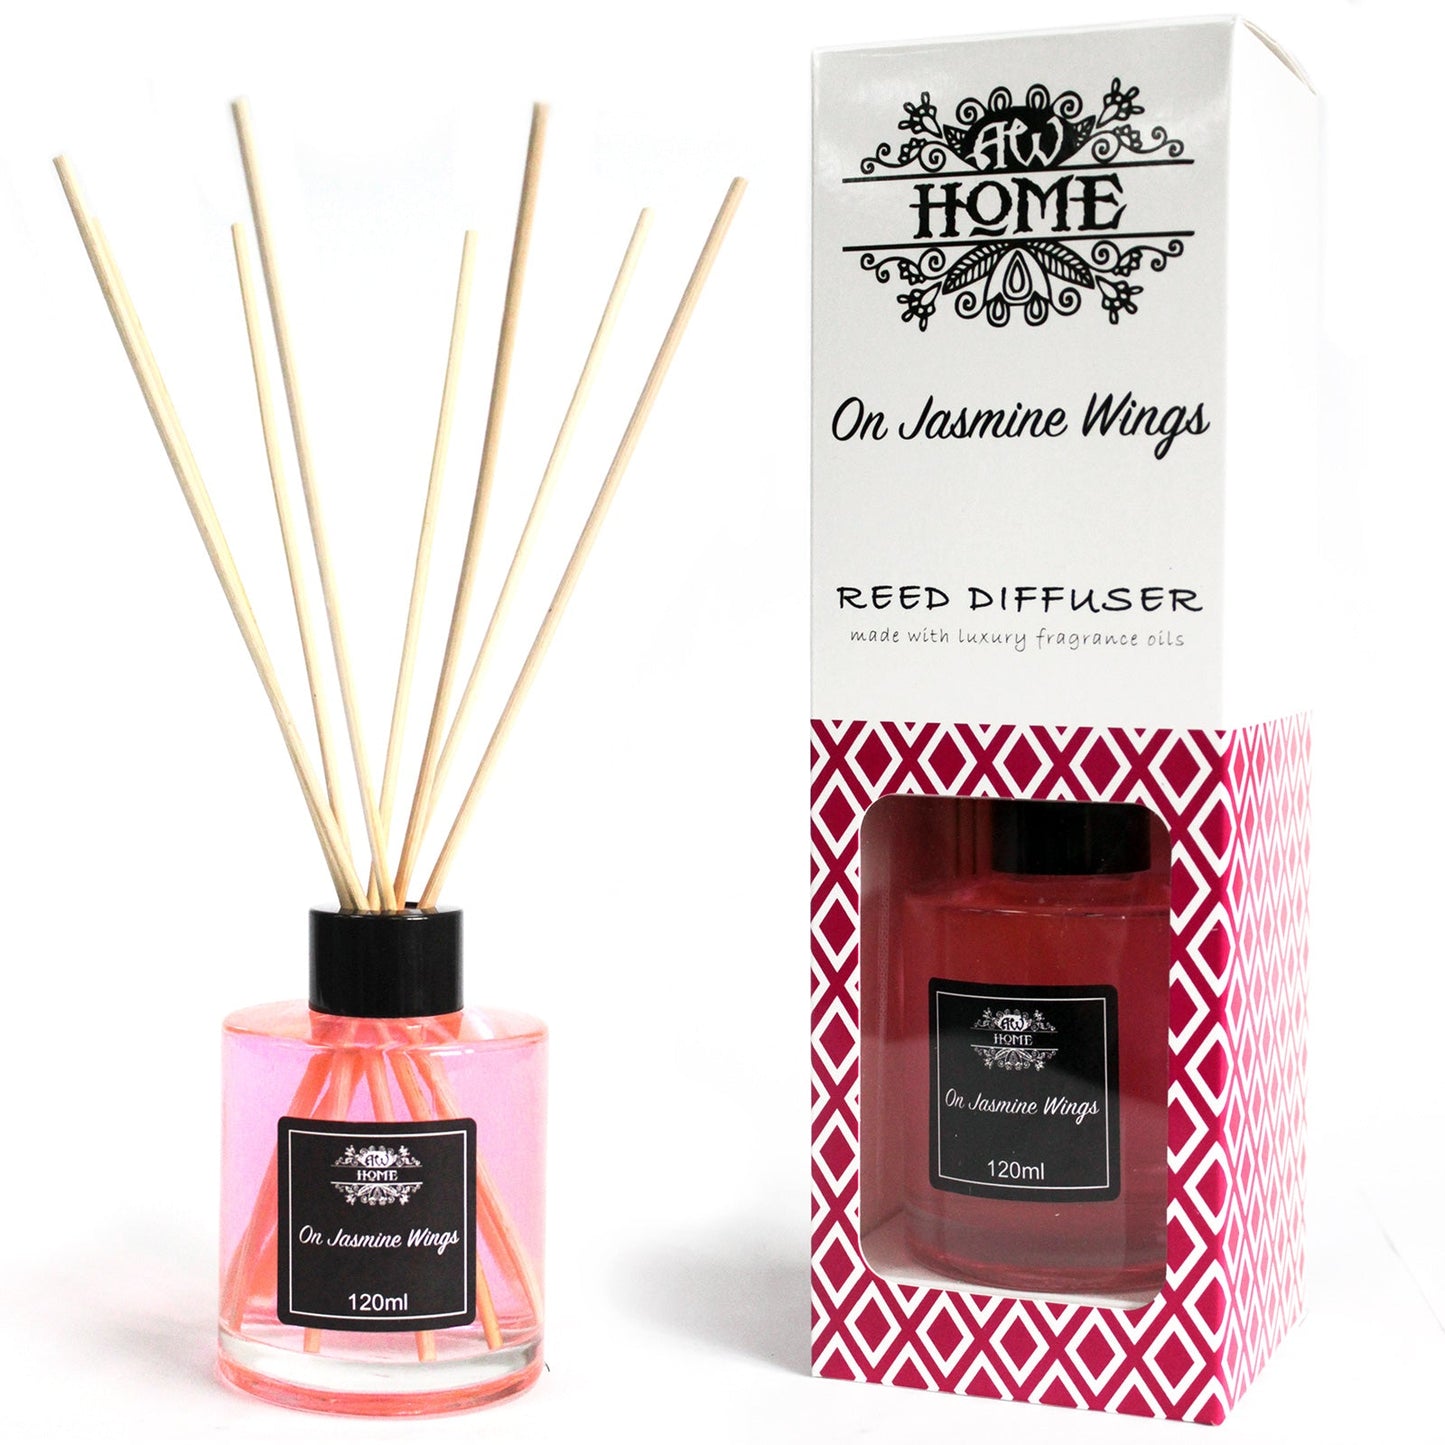 Home Fragrance Reed Diffuser - Various Fragrances - 120ml Home Fragrance Reed Diffusers - 120ml Soul Inspired On Jasmine Wings 